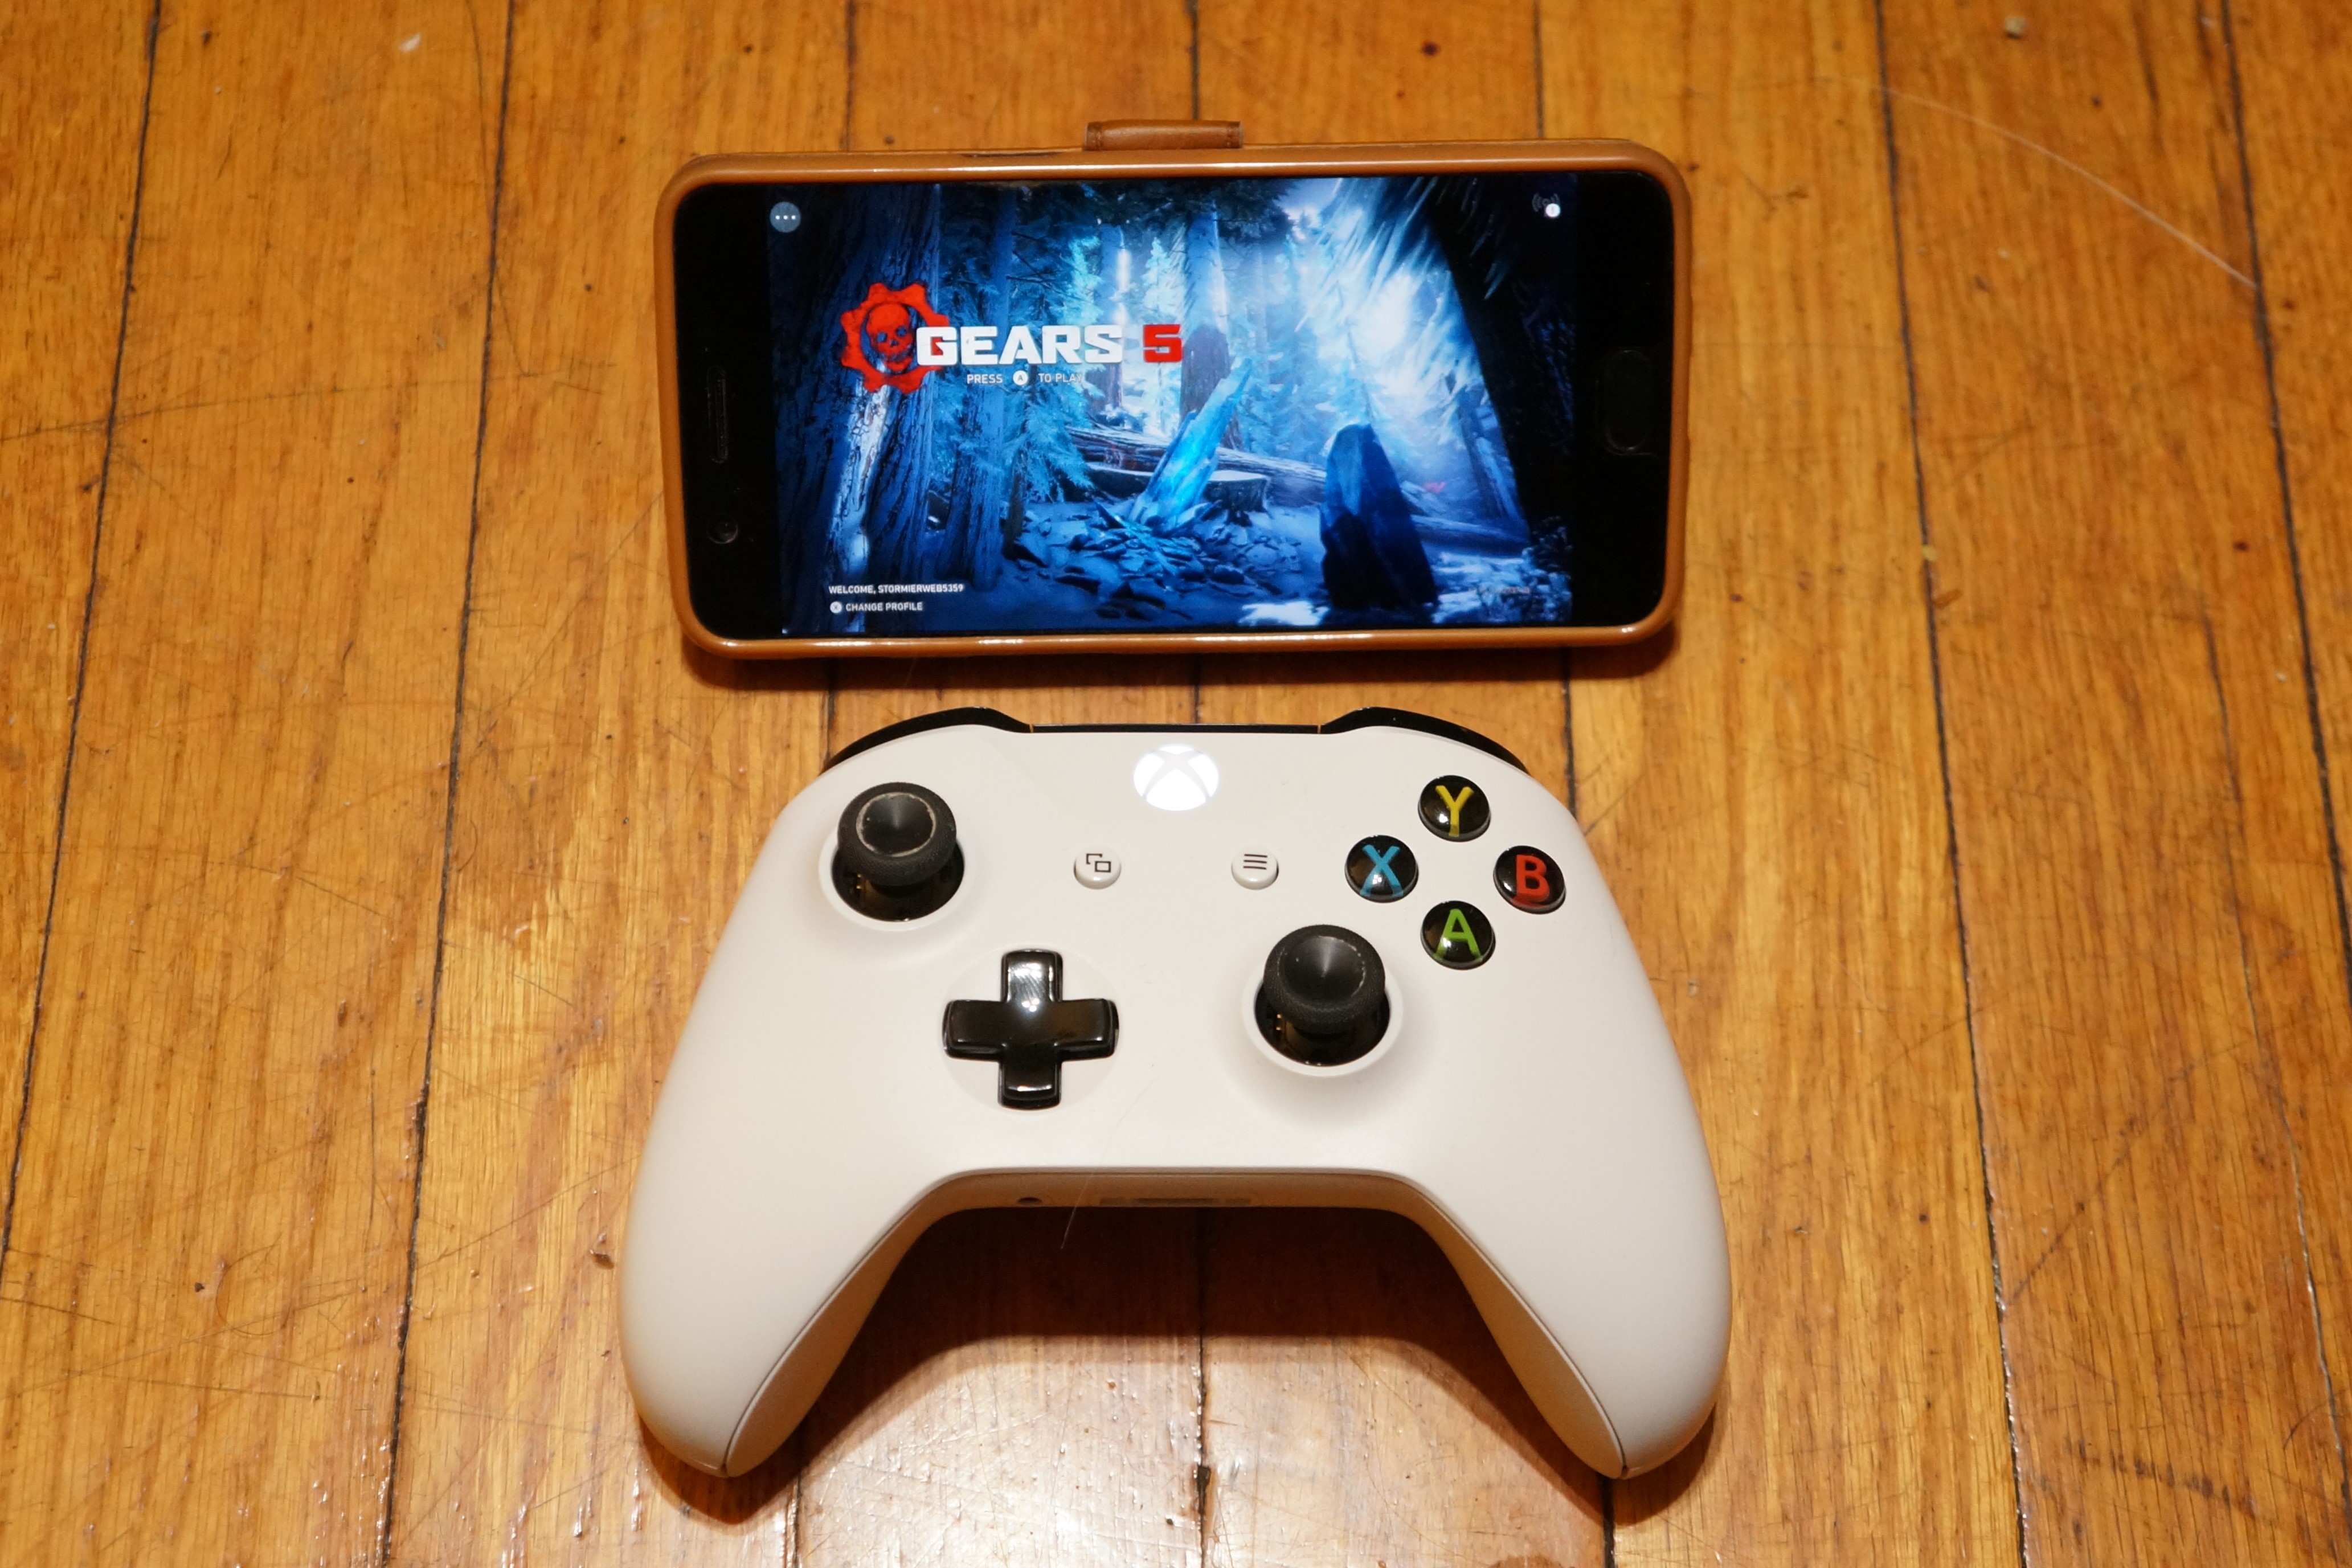 How to set up Xbox Cloud Gaming (xCloud) on iOS